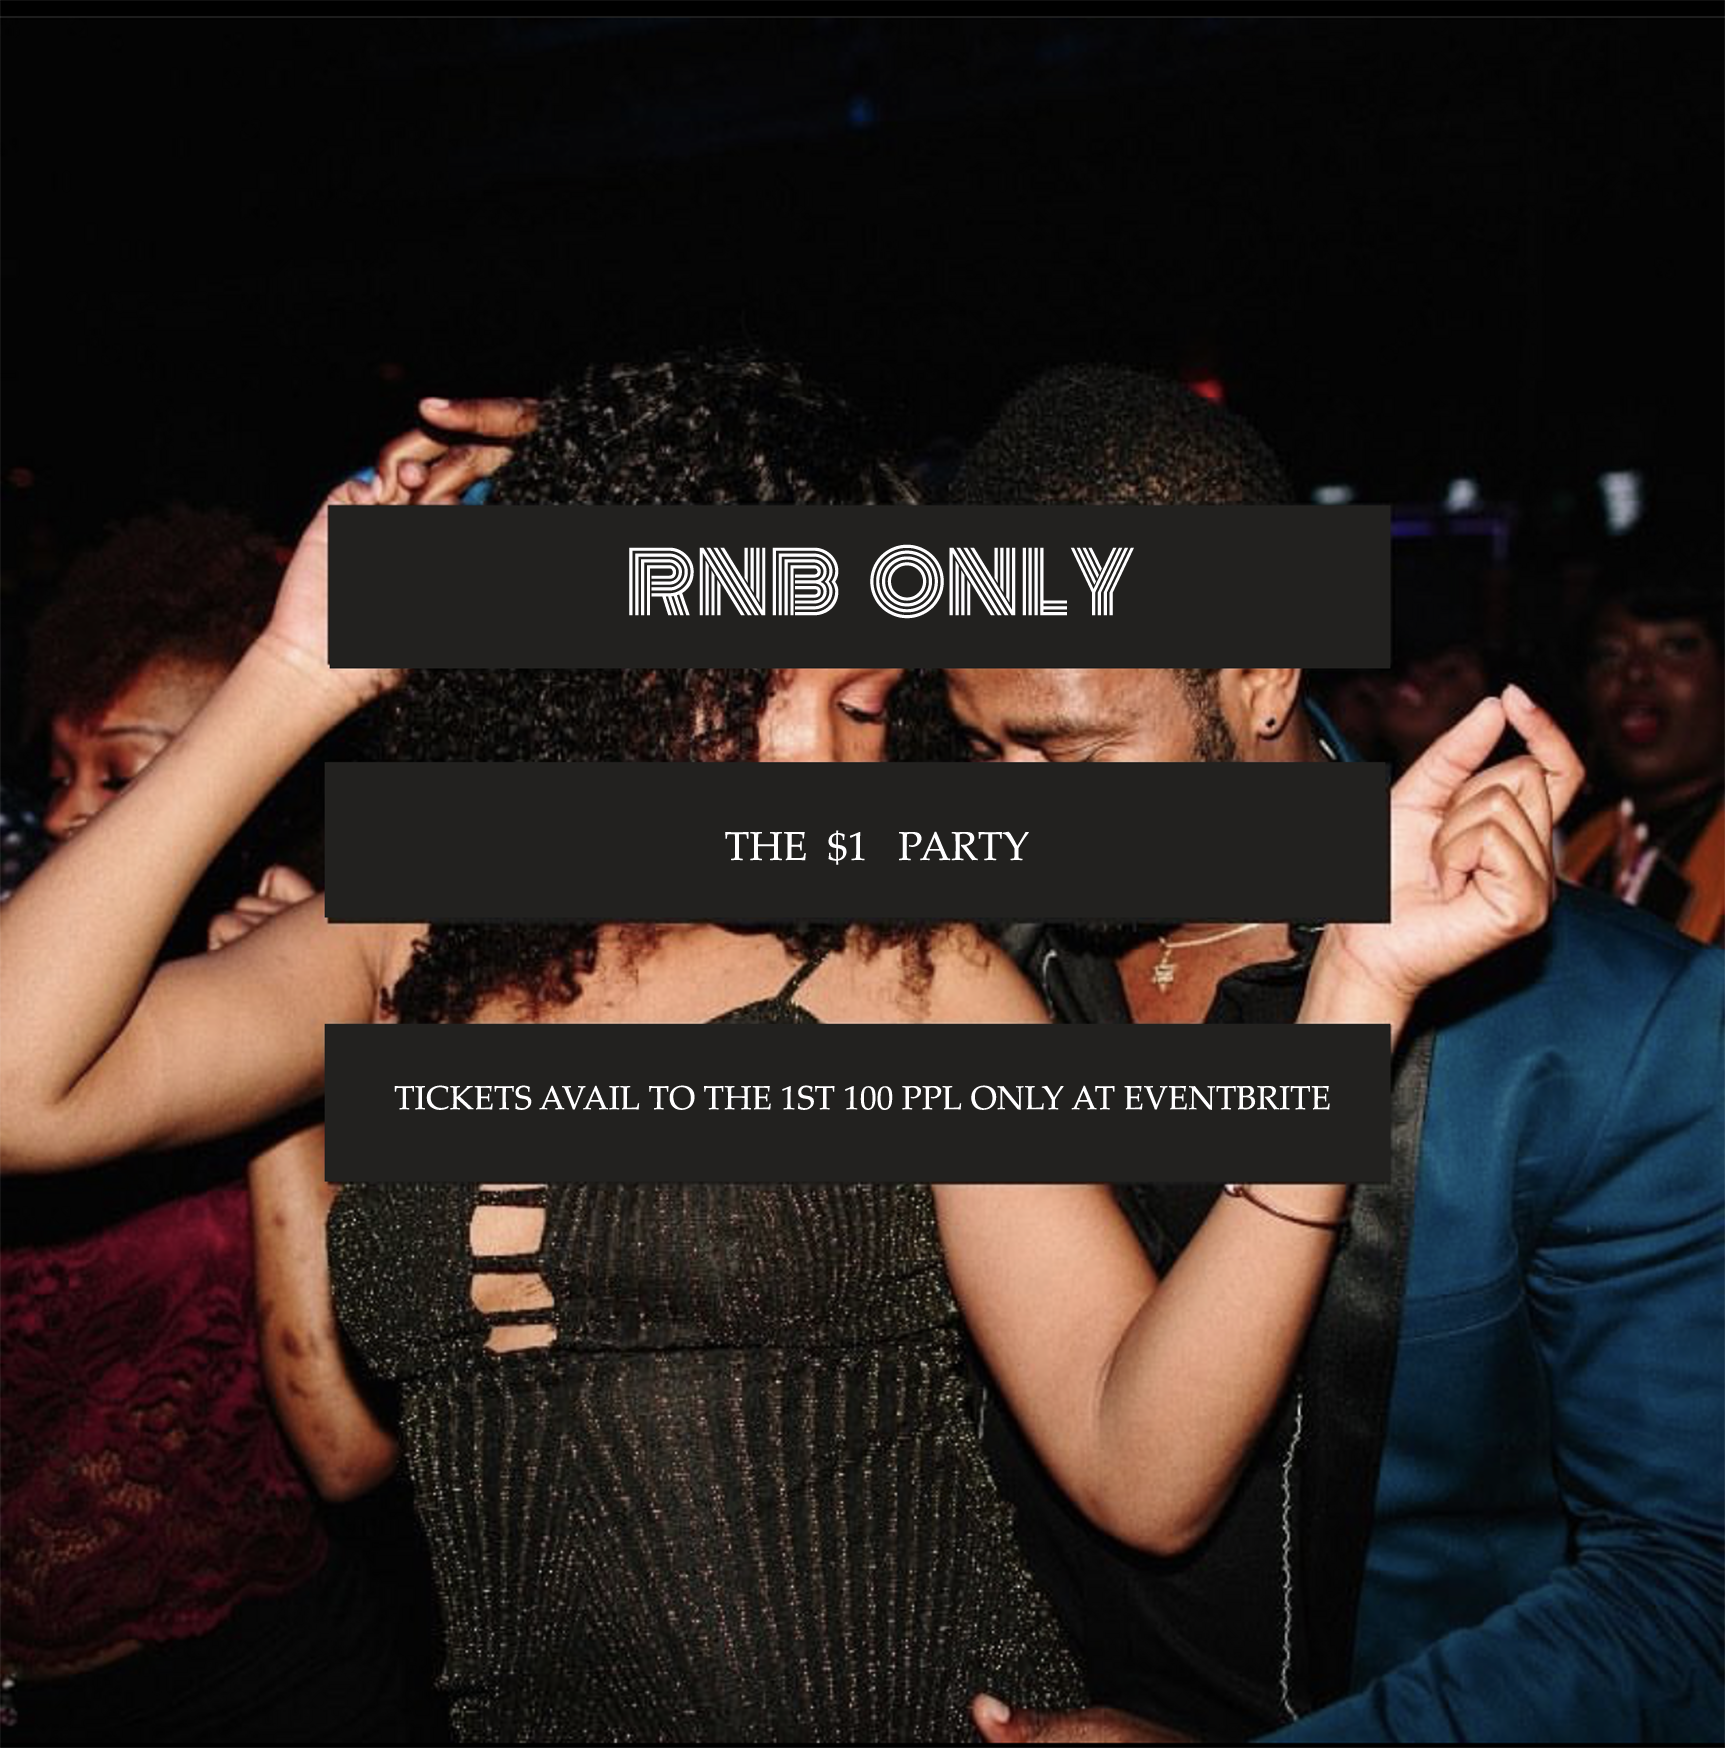 RNB ONLY THE $1 PARTY